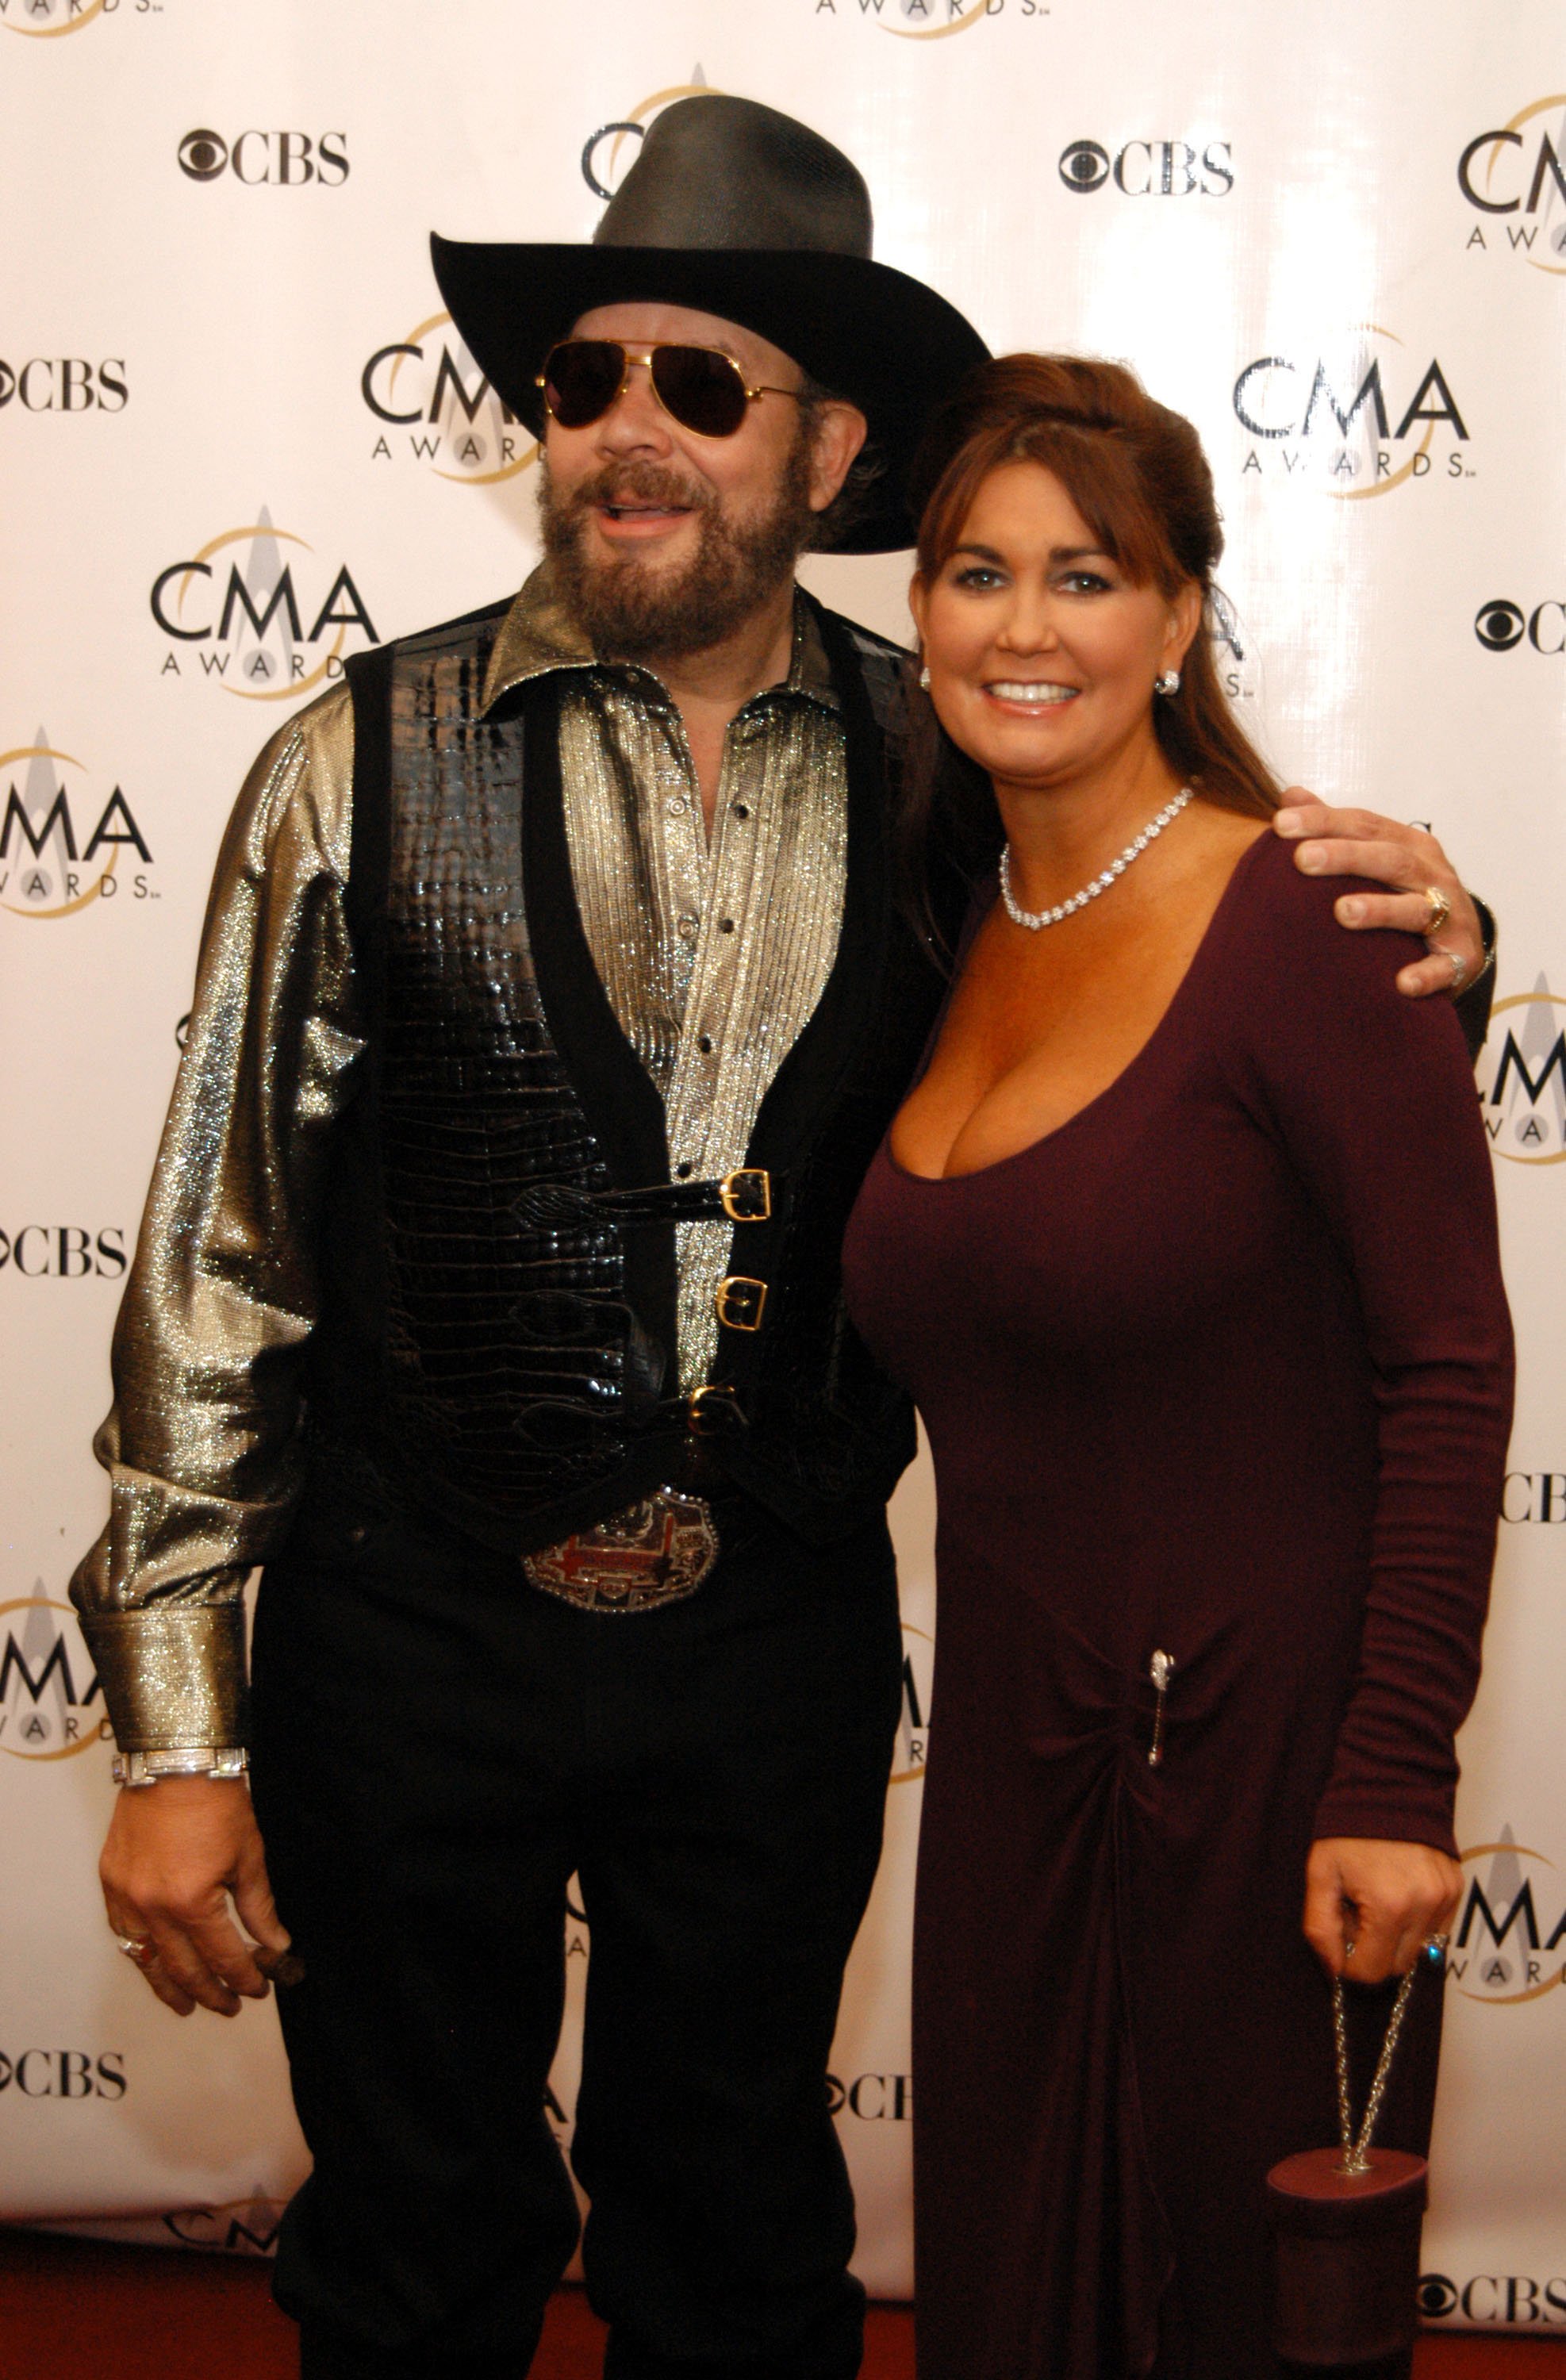 Hank Williams Jr. and Mary Jane at the 37th Annual CMA Awards on November 5, 2003 | Source: Getty Images